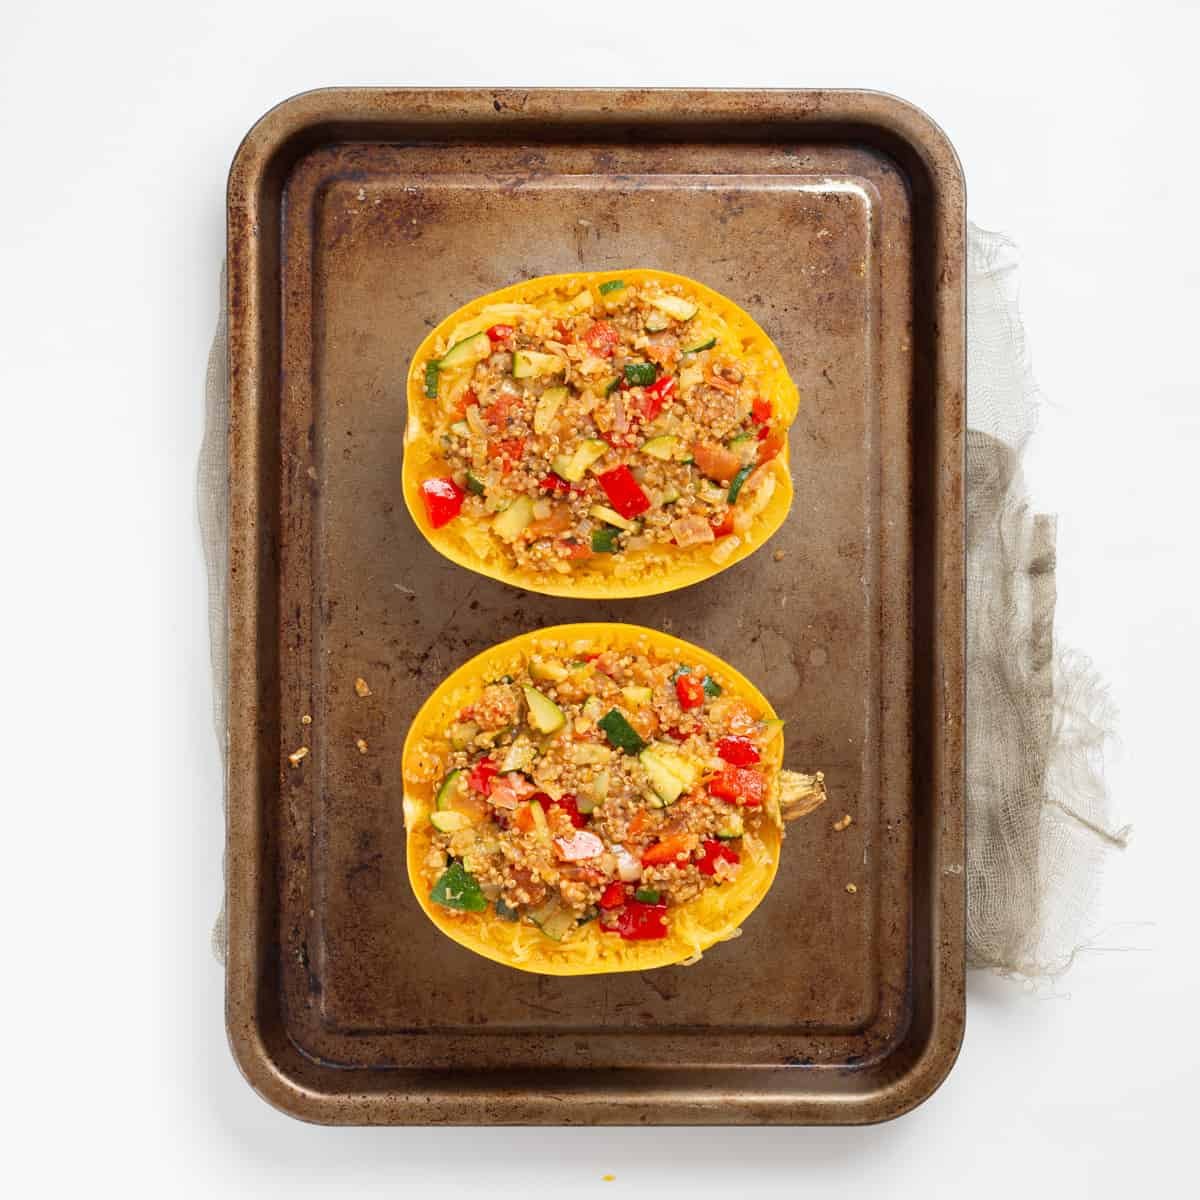 An overhead image of two spaghetti squash halves on a baking sheet, stuffed with sauteed vegetables.